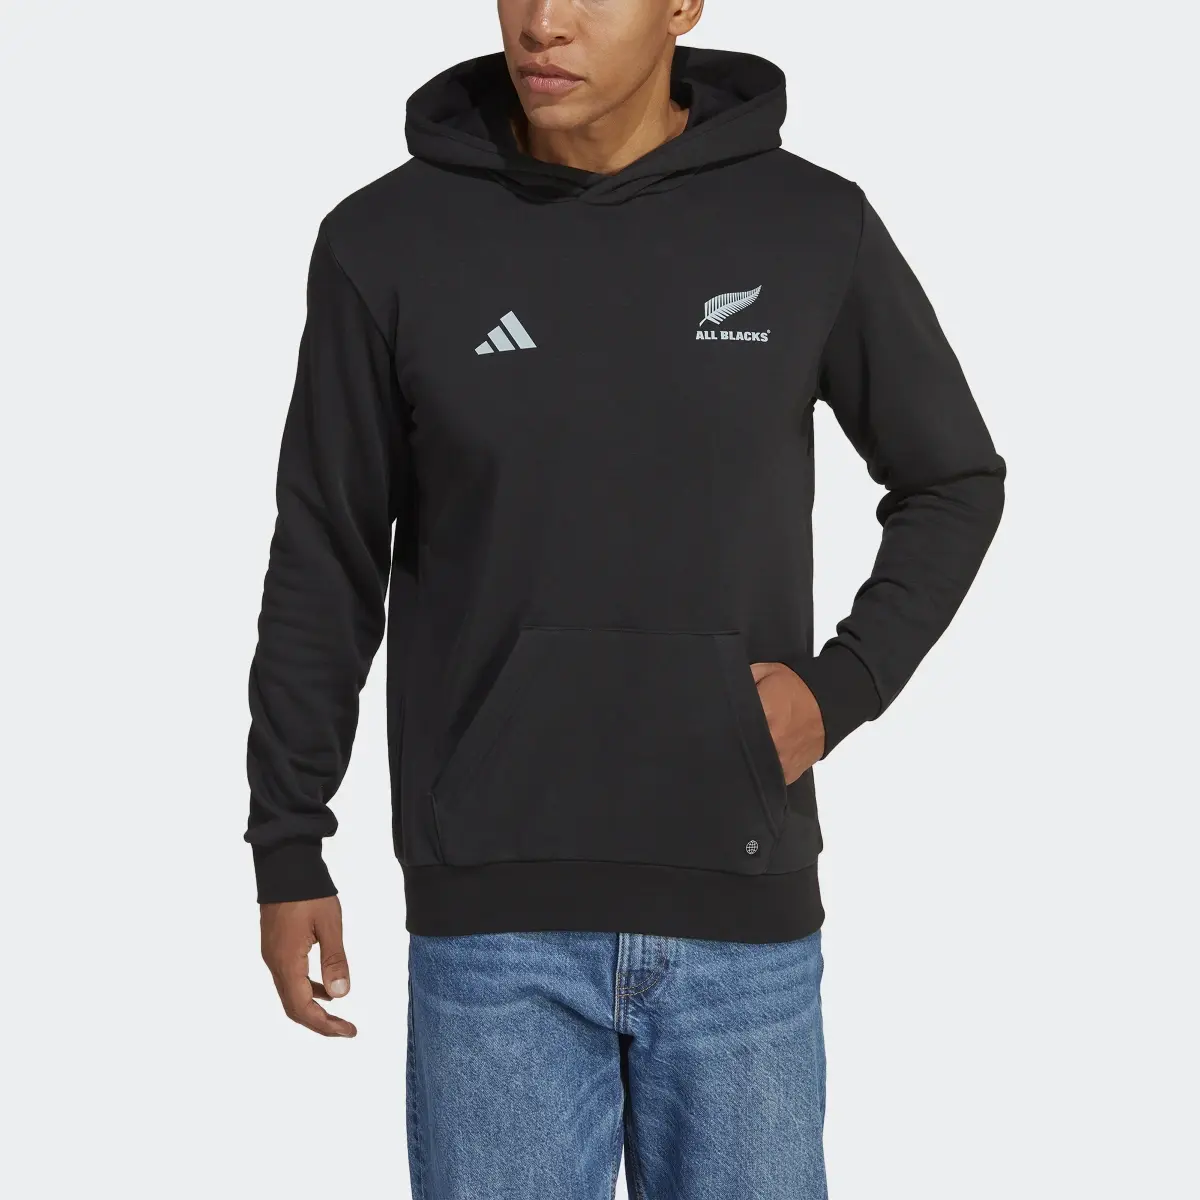 Adidas All Blacks Rugby Supporters Hoodie. 1